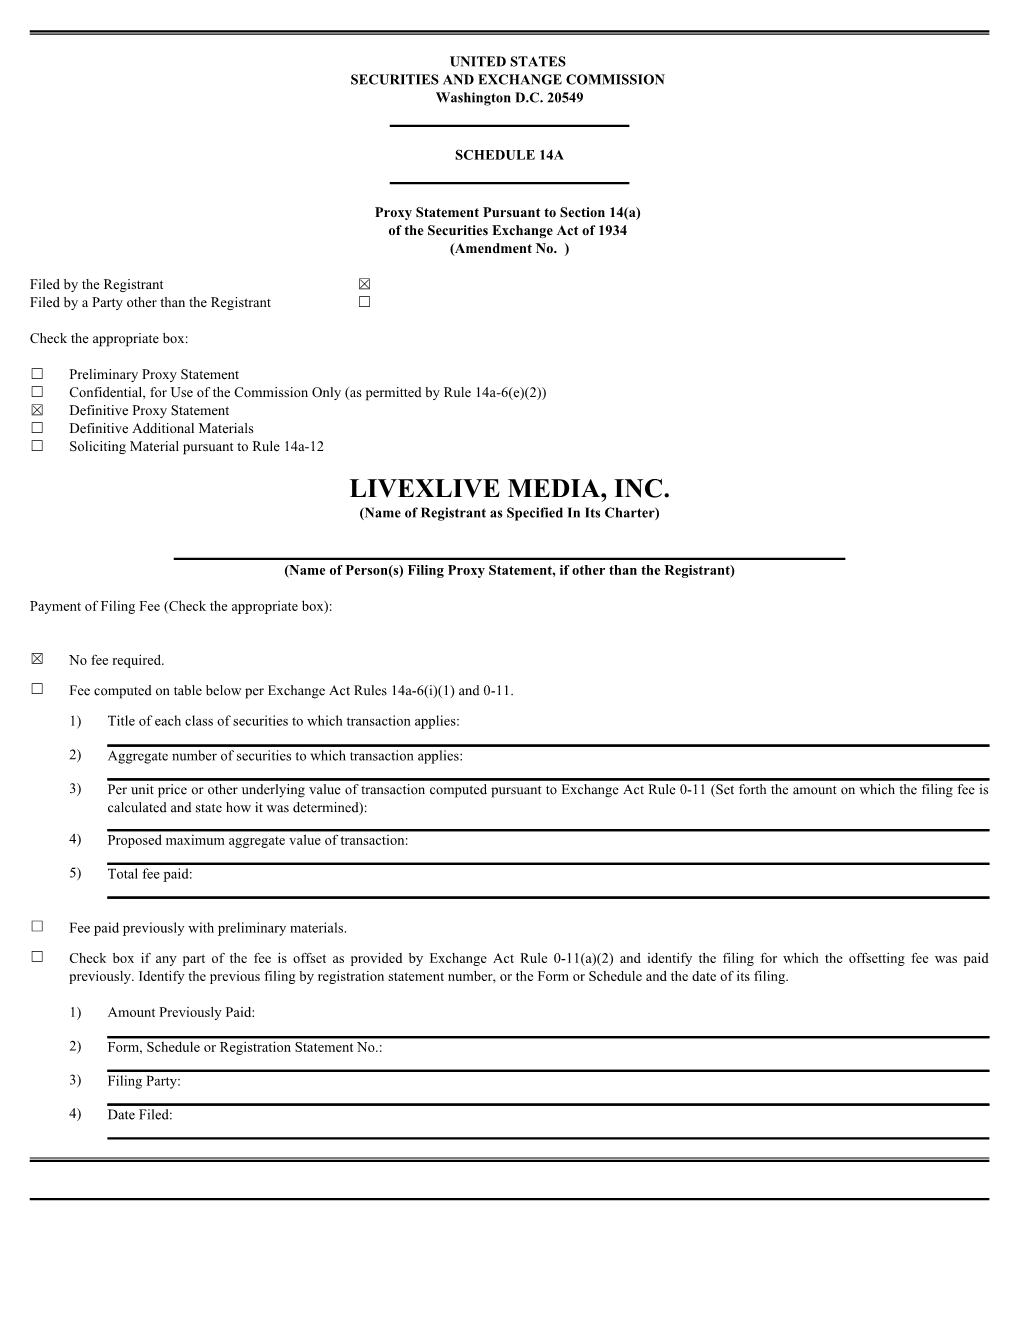 LIVEXLIVE MEDIA, INC. (Name of Registrant As Specified in Its Charter)